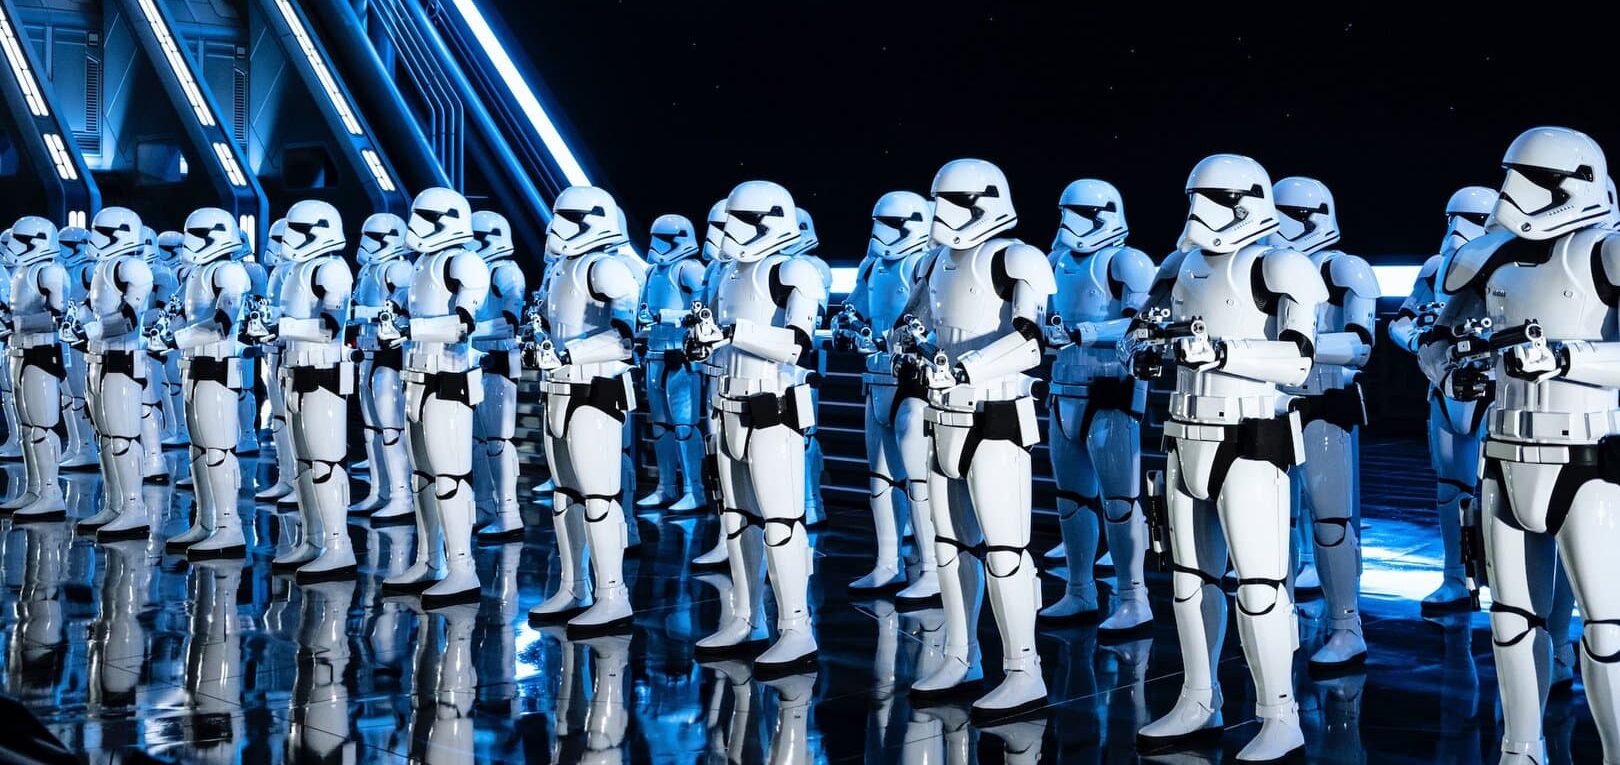 What Star Wars Can Teach Us About Good and Evil